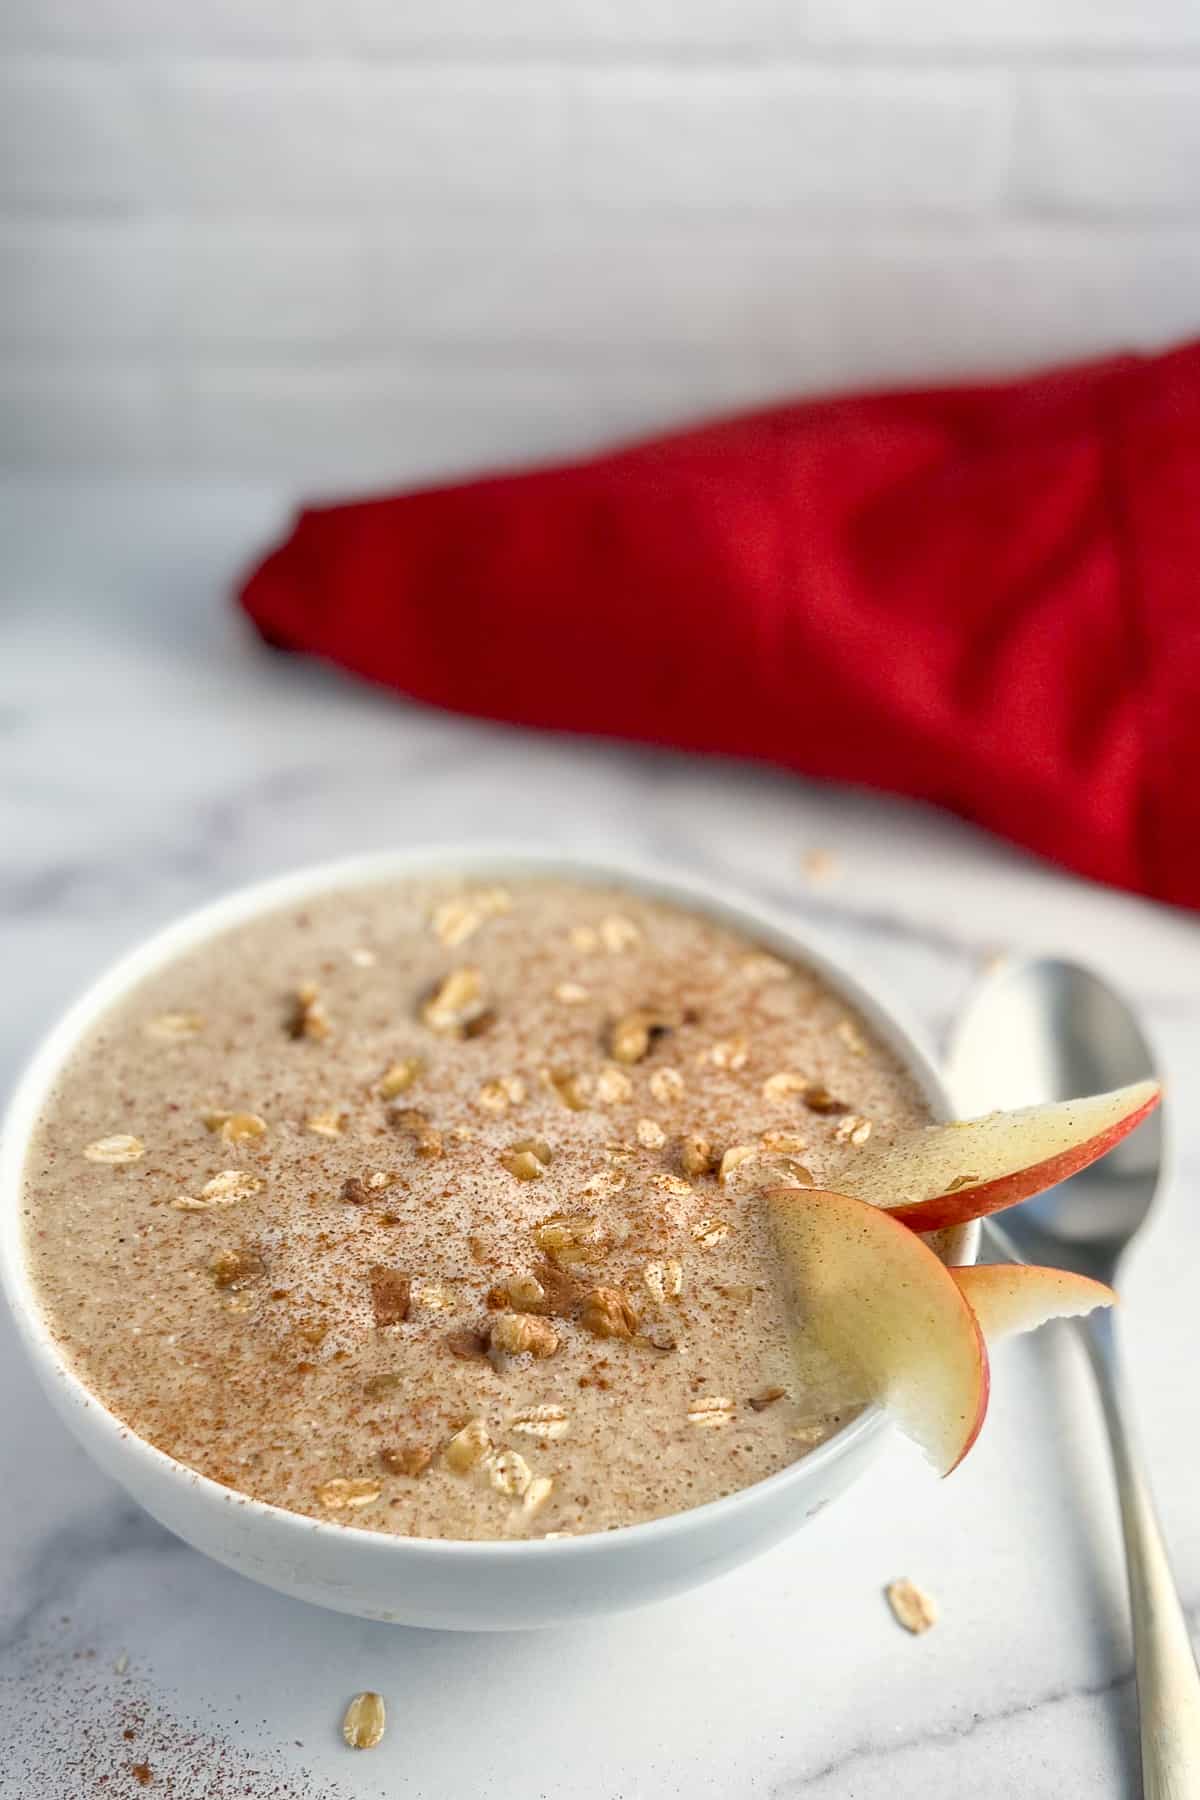 side view of apple smoothie bowl with sliced apples, cinnamon, chopped walnuts and rolled oats on top with spoon and red napkin blurred in the background